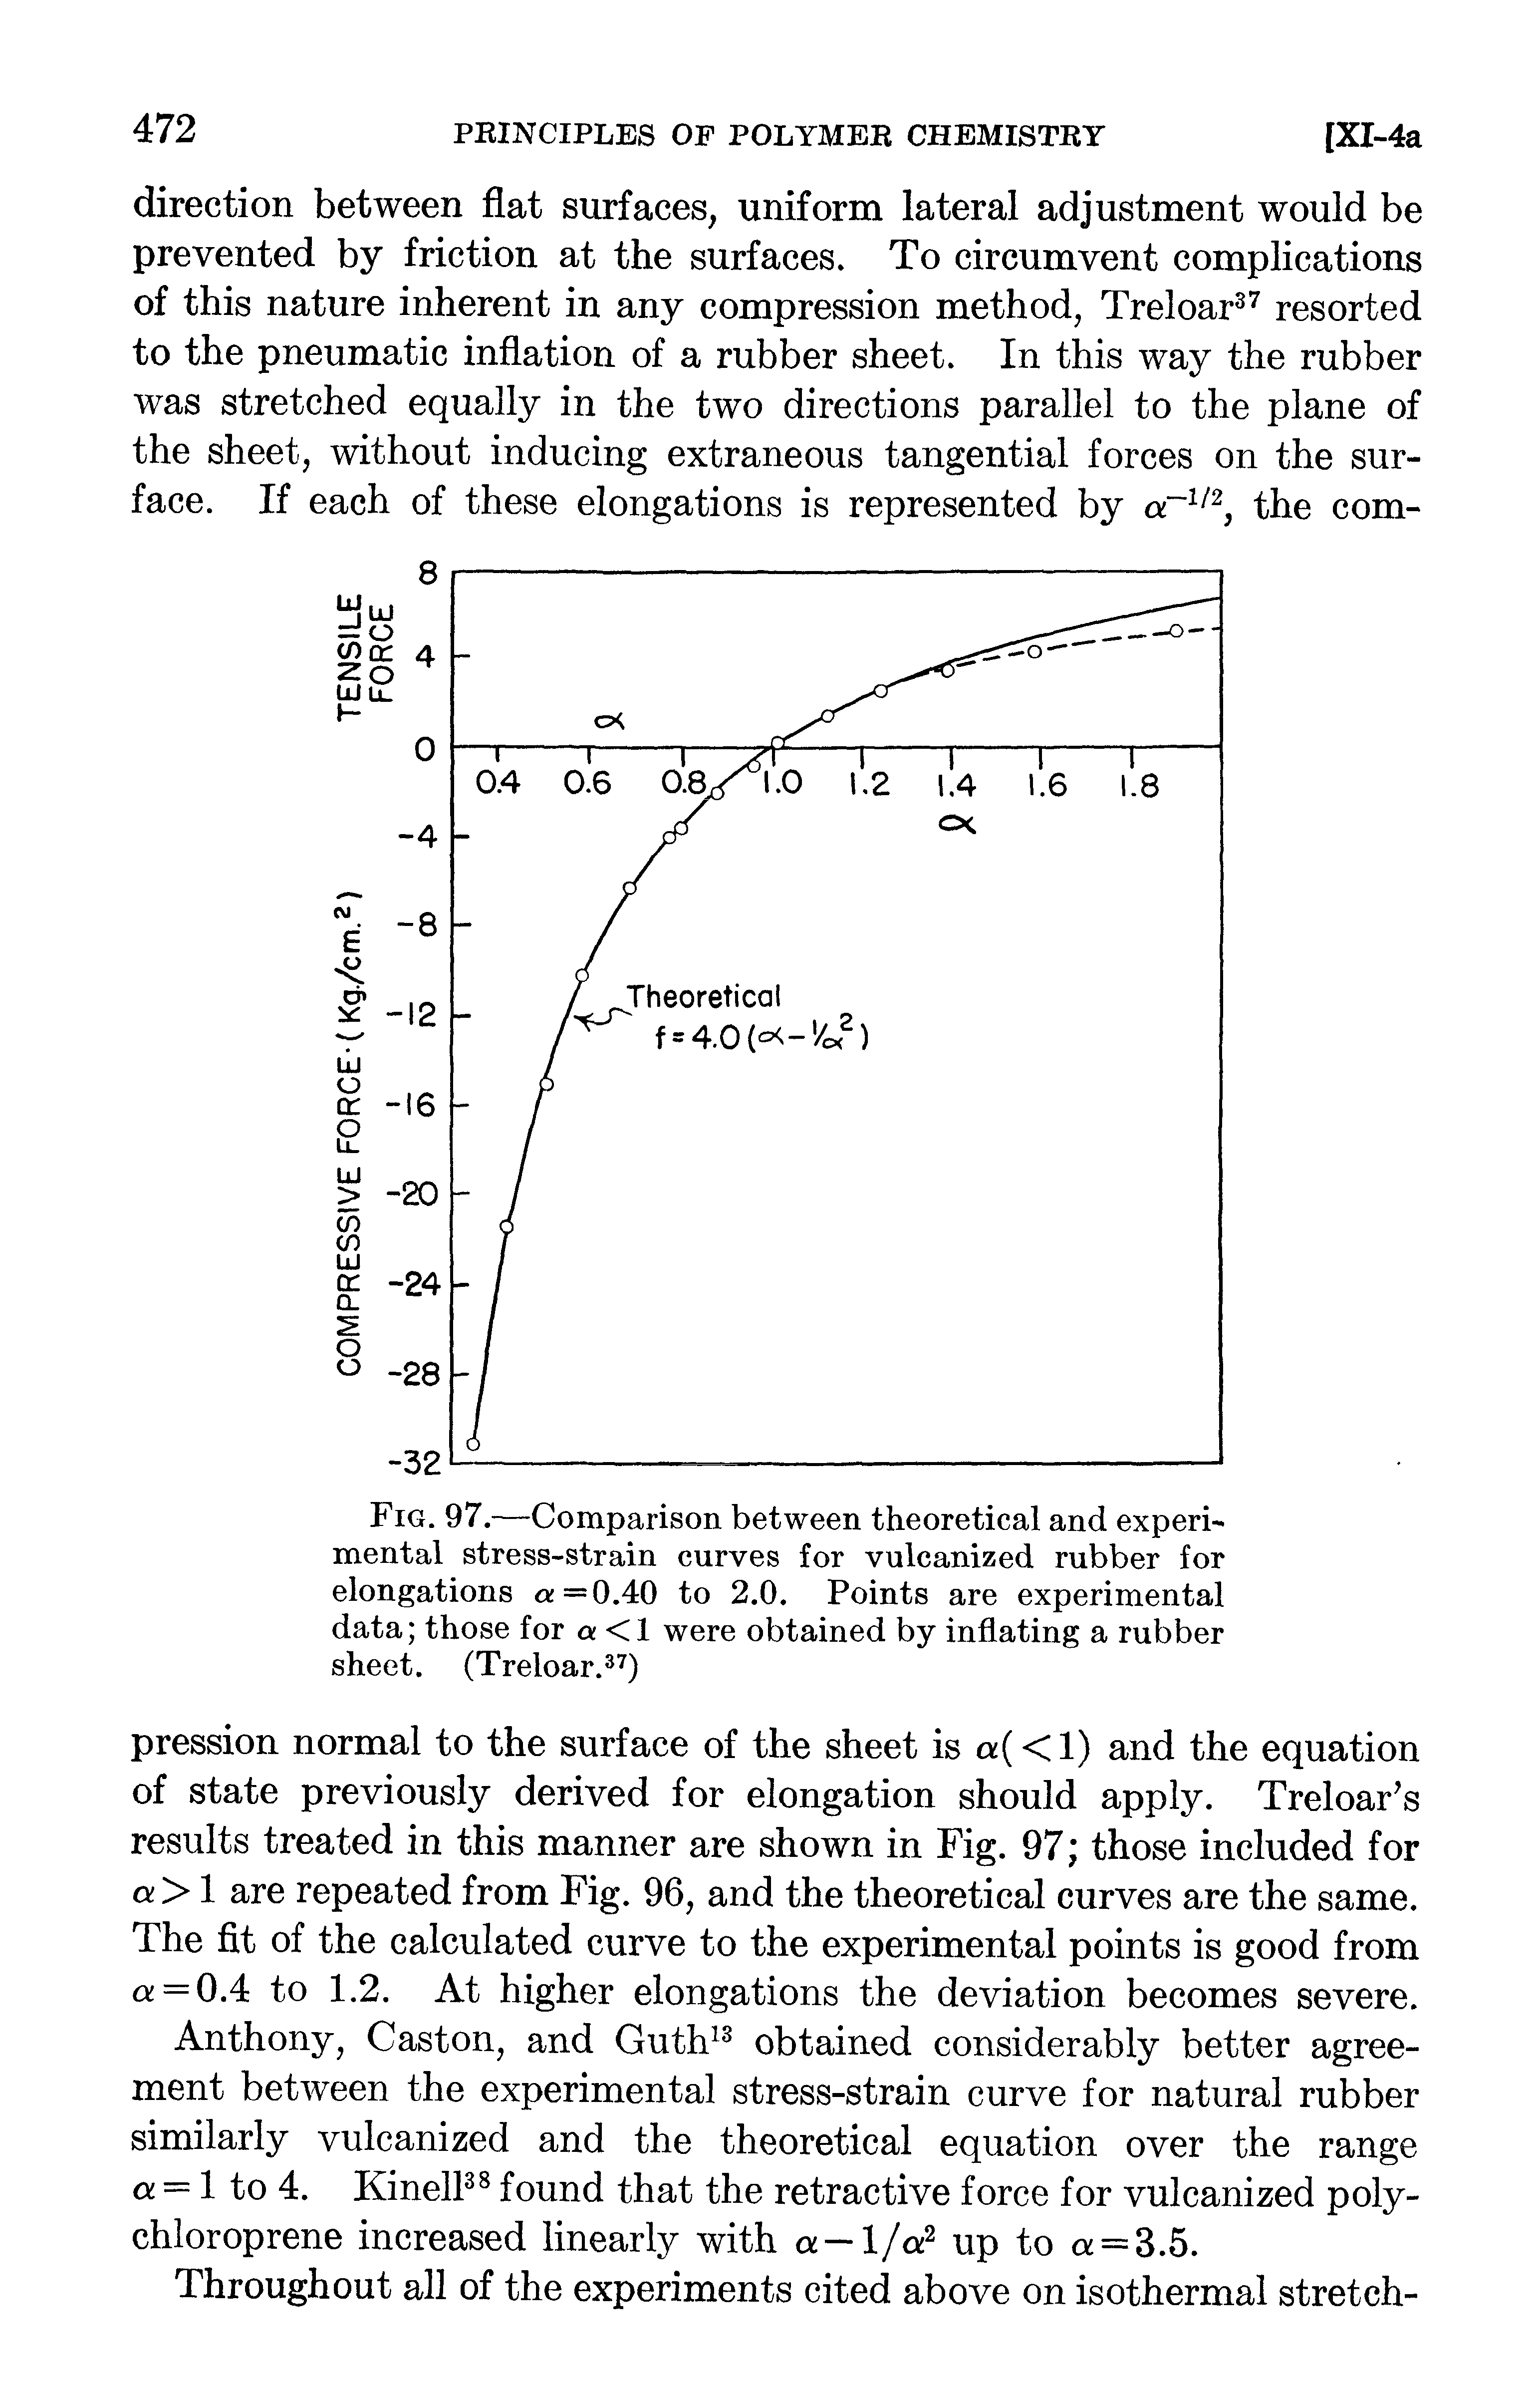 Fig. 97.—Comparison between theoretical and experimental stress-strain curves for vulcanized rubber for elongations =0.40 to 2.0. Points are experimental data those for a <1 were obtained by inflating a rubber sheet. (Treloar. )...